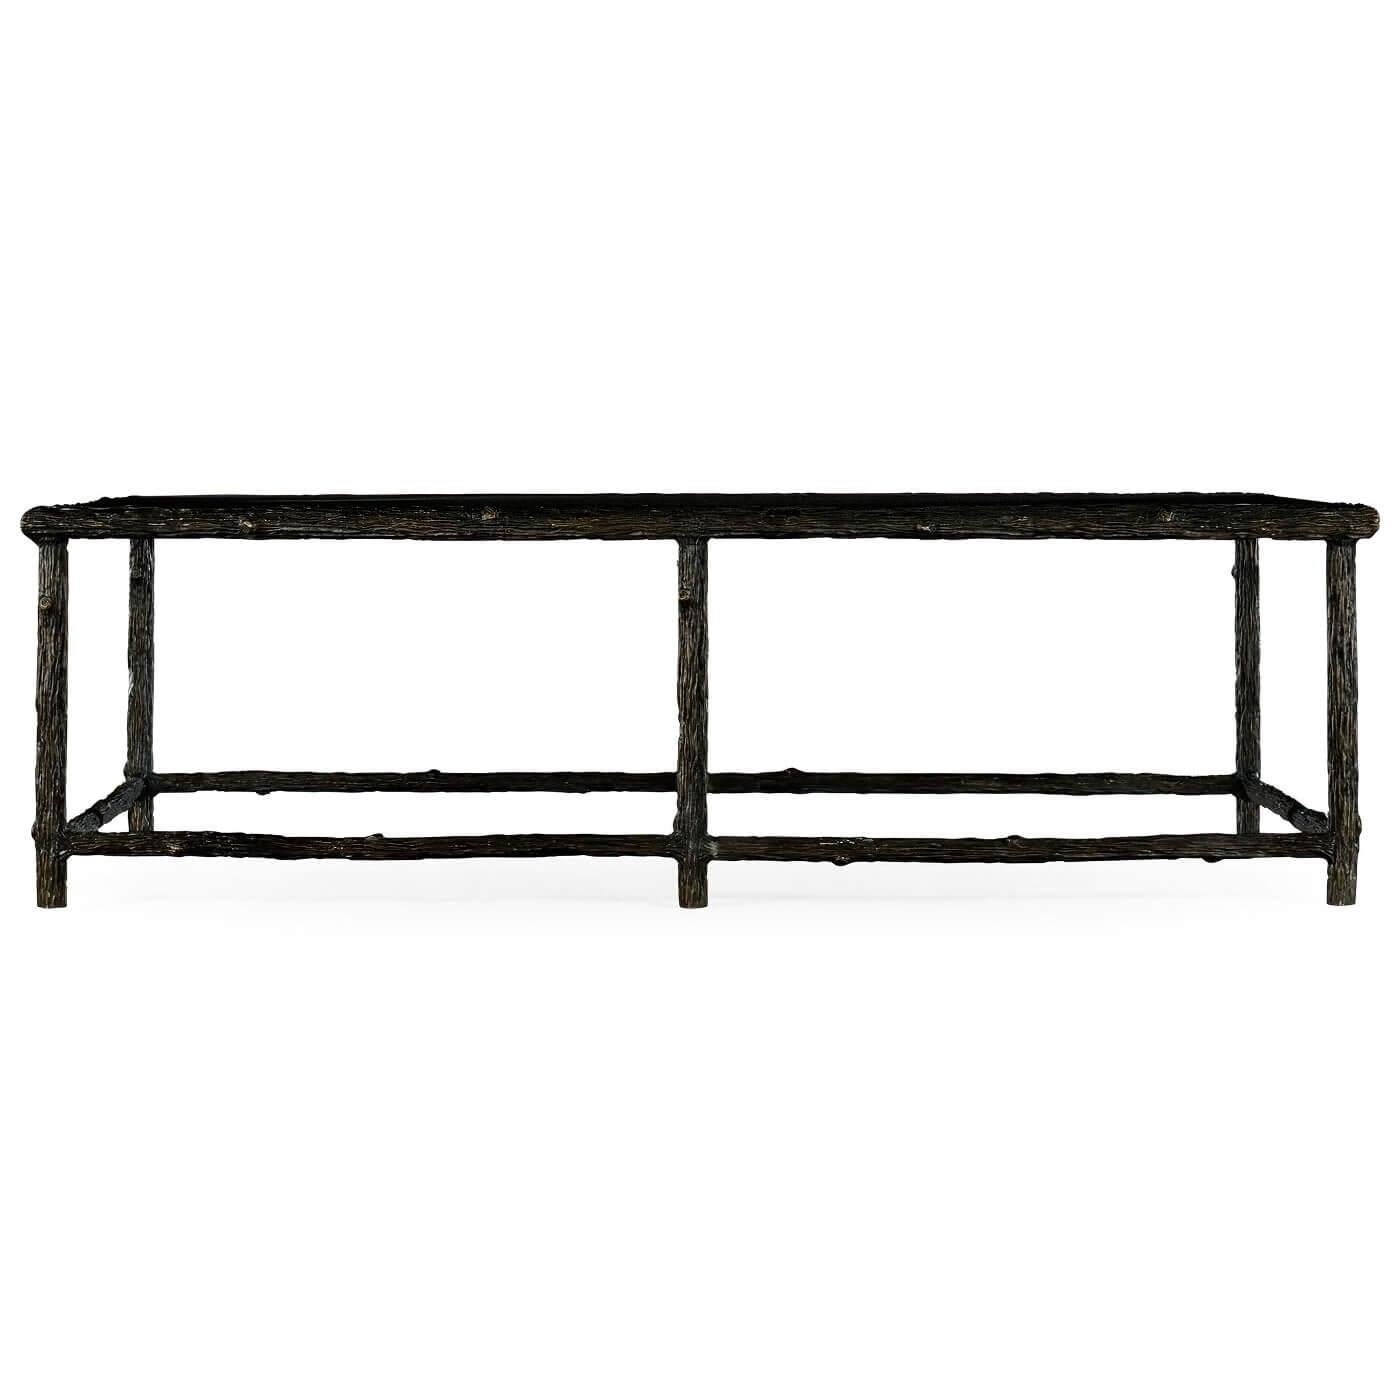 A modern faux bois coffee table with an antiqued bronze finish. The natural look of modern branches with a glass top and stretcher base.

Dimensions: 60